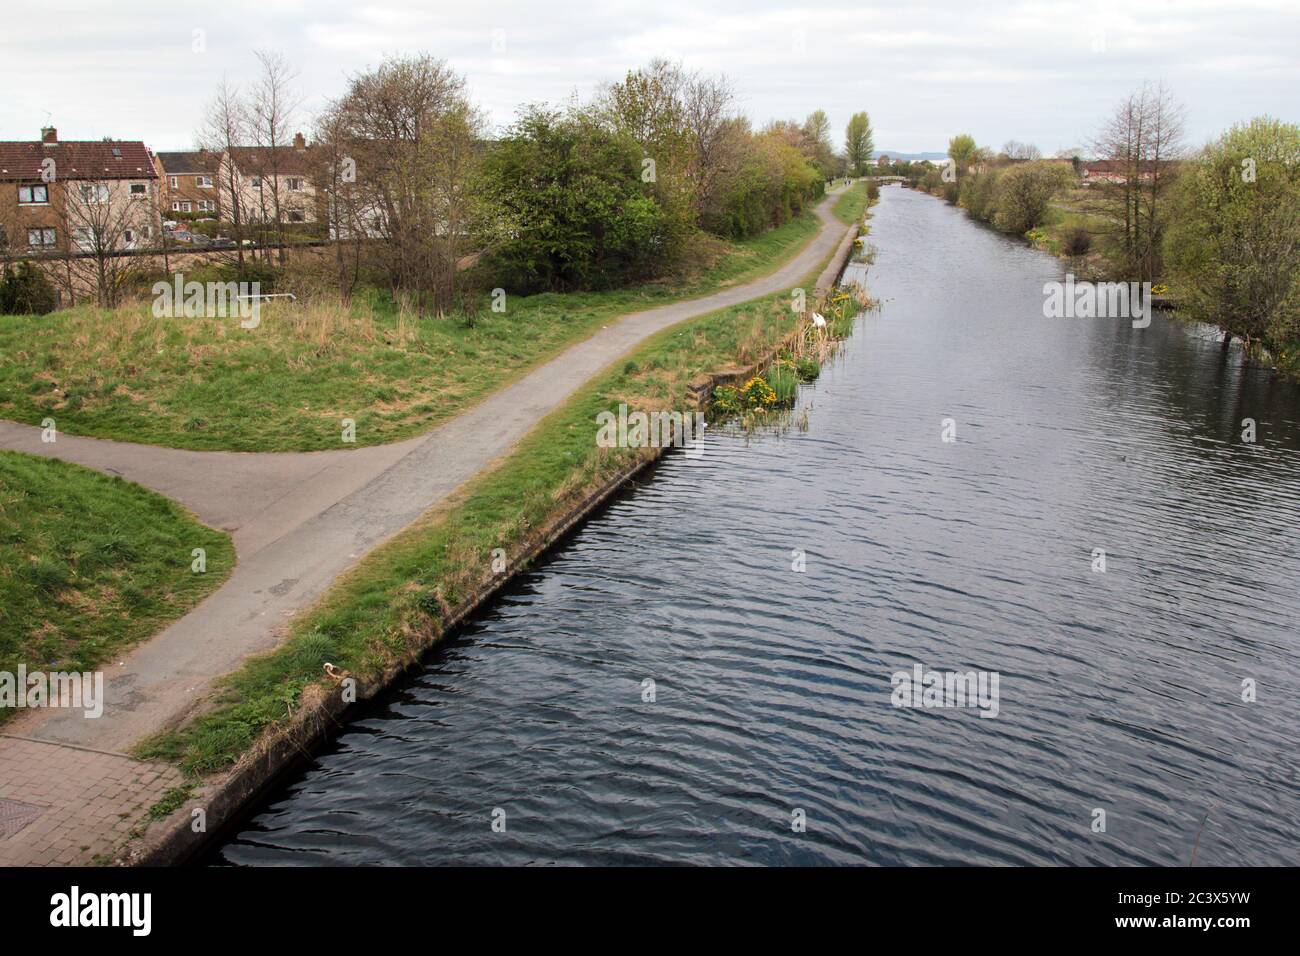 A stretch of the Forth and Clyde canal that runs through the city of Glasgow, is normally busy with joggers, walkers and cyclists; but, because of the coronavirus and Cvid-19 pandemic raging through the UK, is  empty and deserted as there is a lockdown and instructions to stay at home for now. ALAN WYLIE/ALAMY © Stock Photo